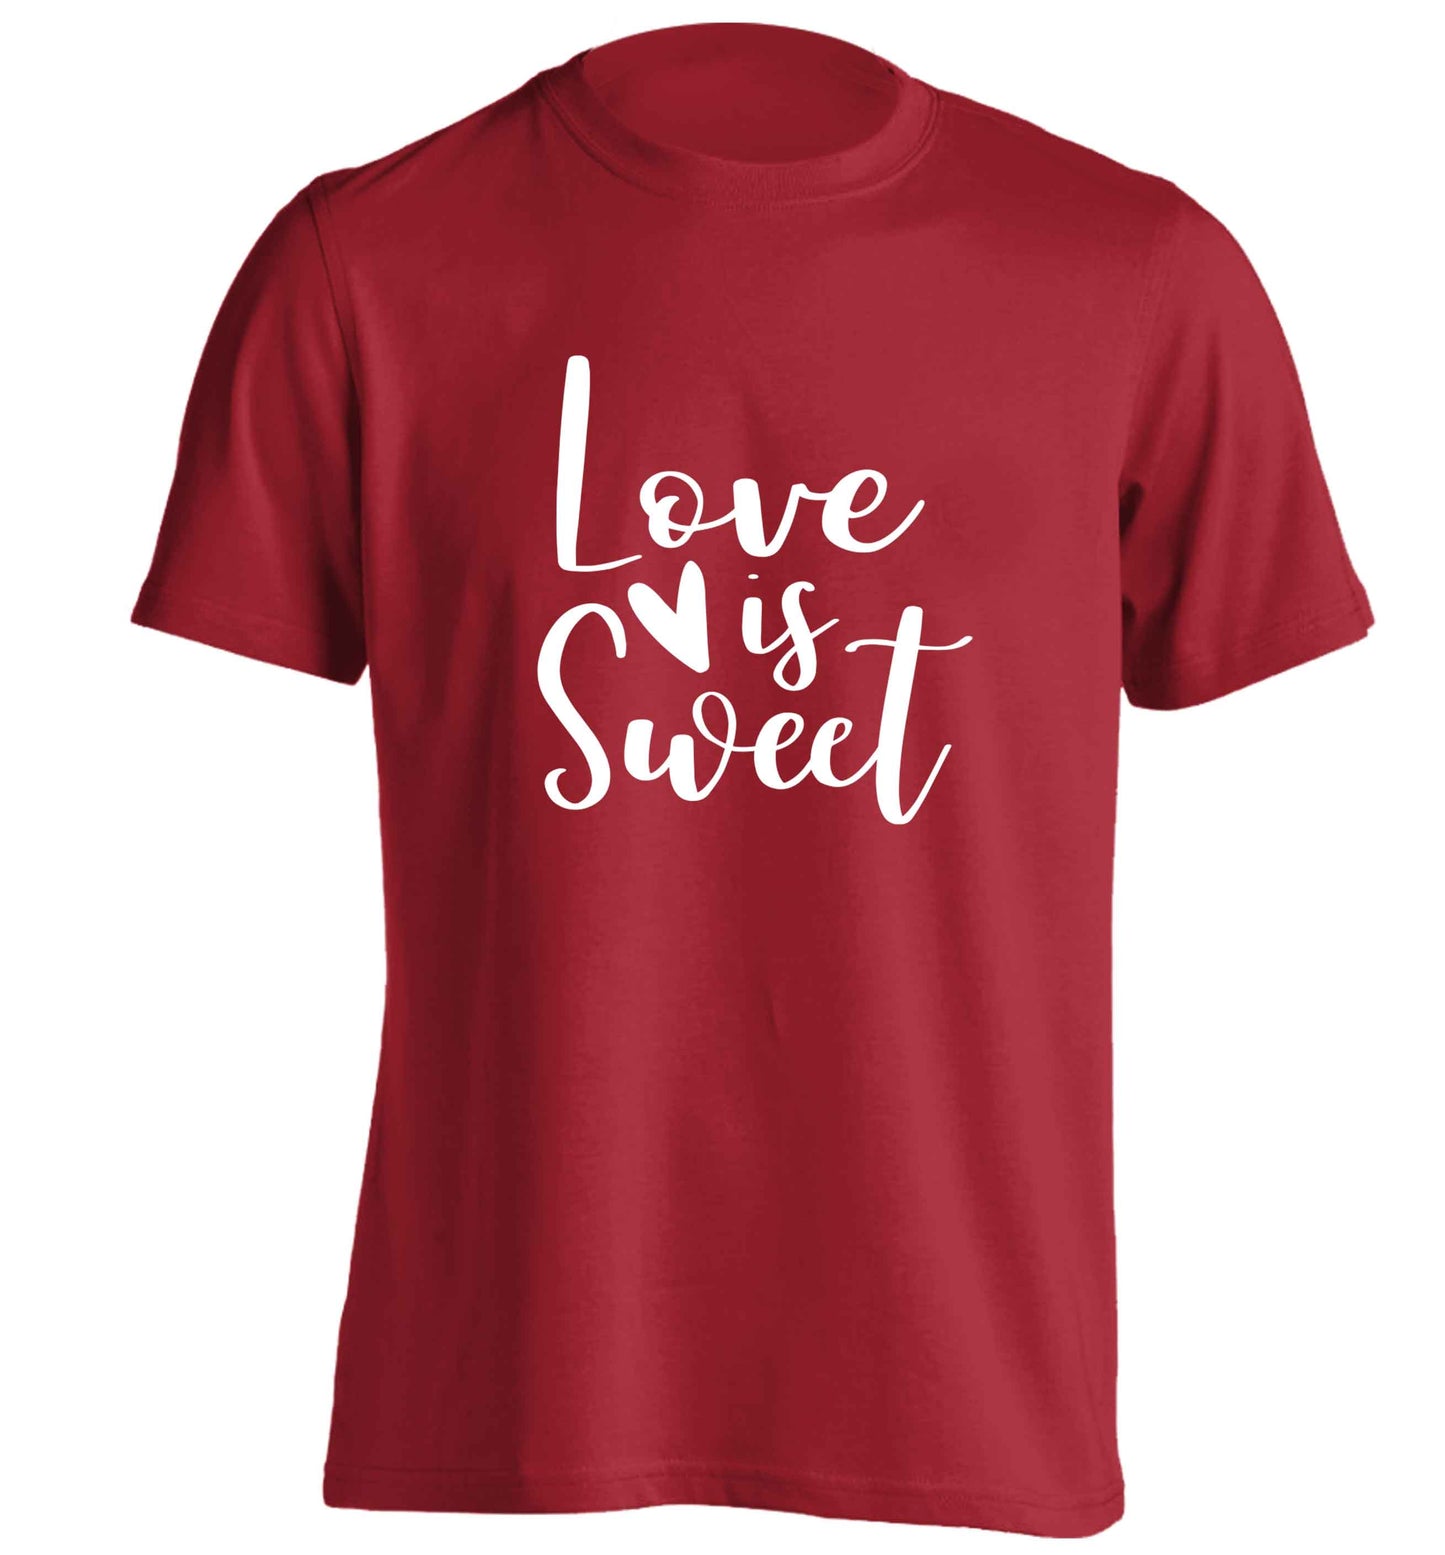 Love really does make the world go round! Ideal for weddings, valentines or just simply to show someone you love them!  adults unisex red Tshirt 2XL